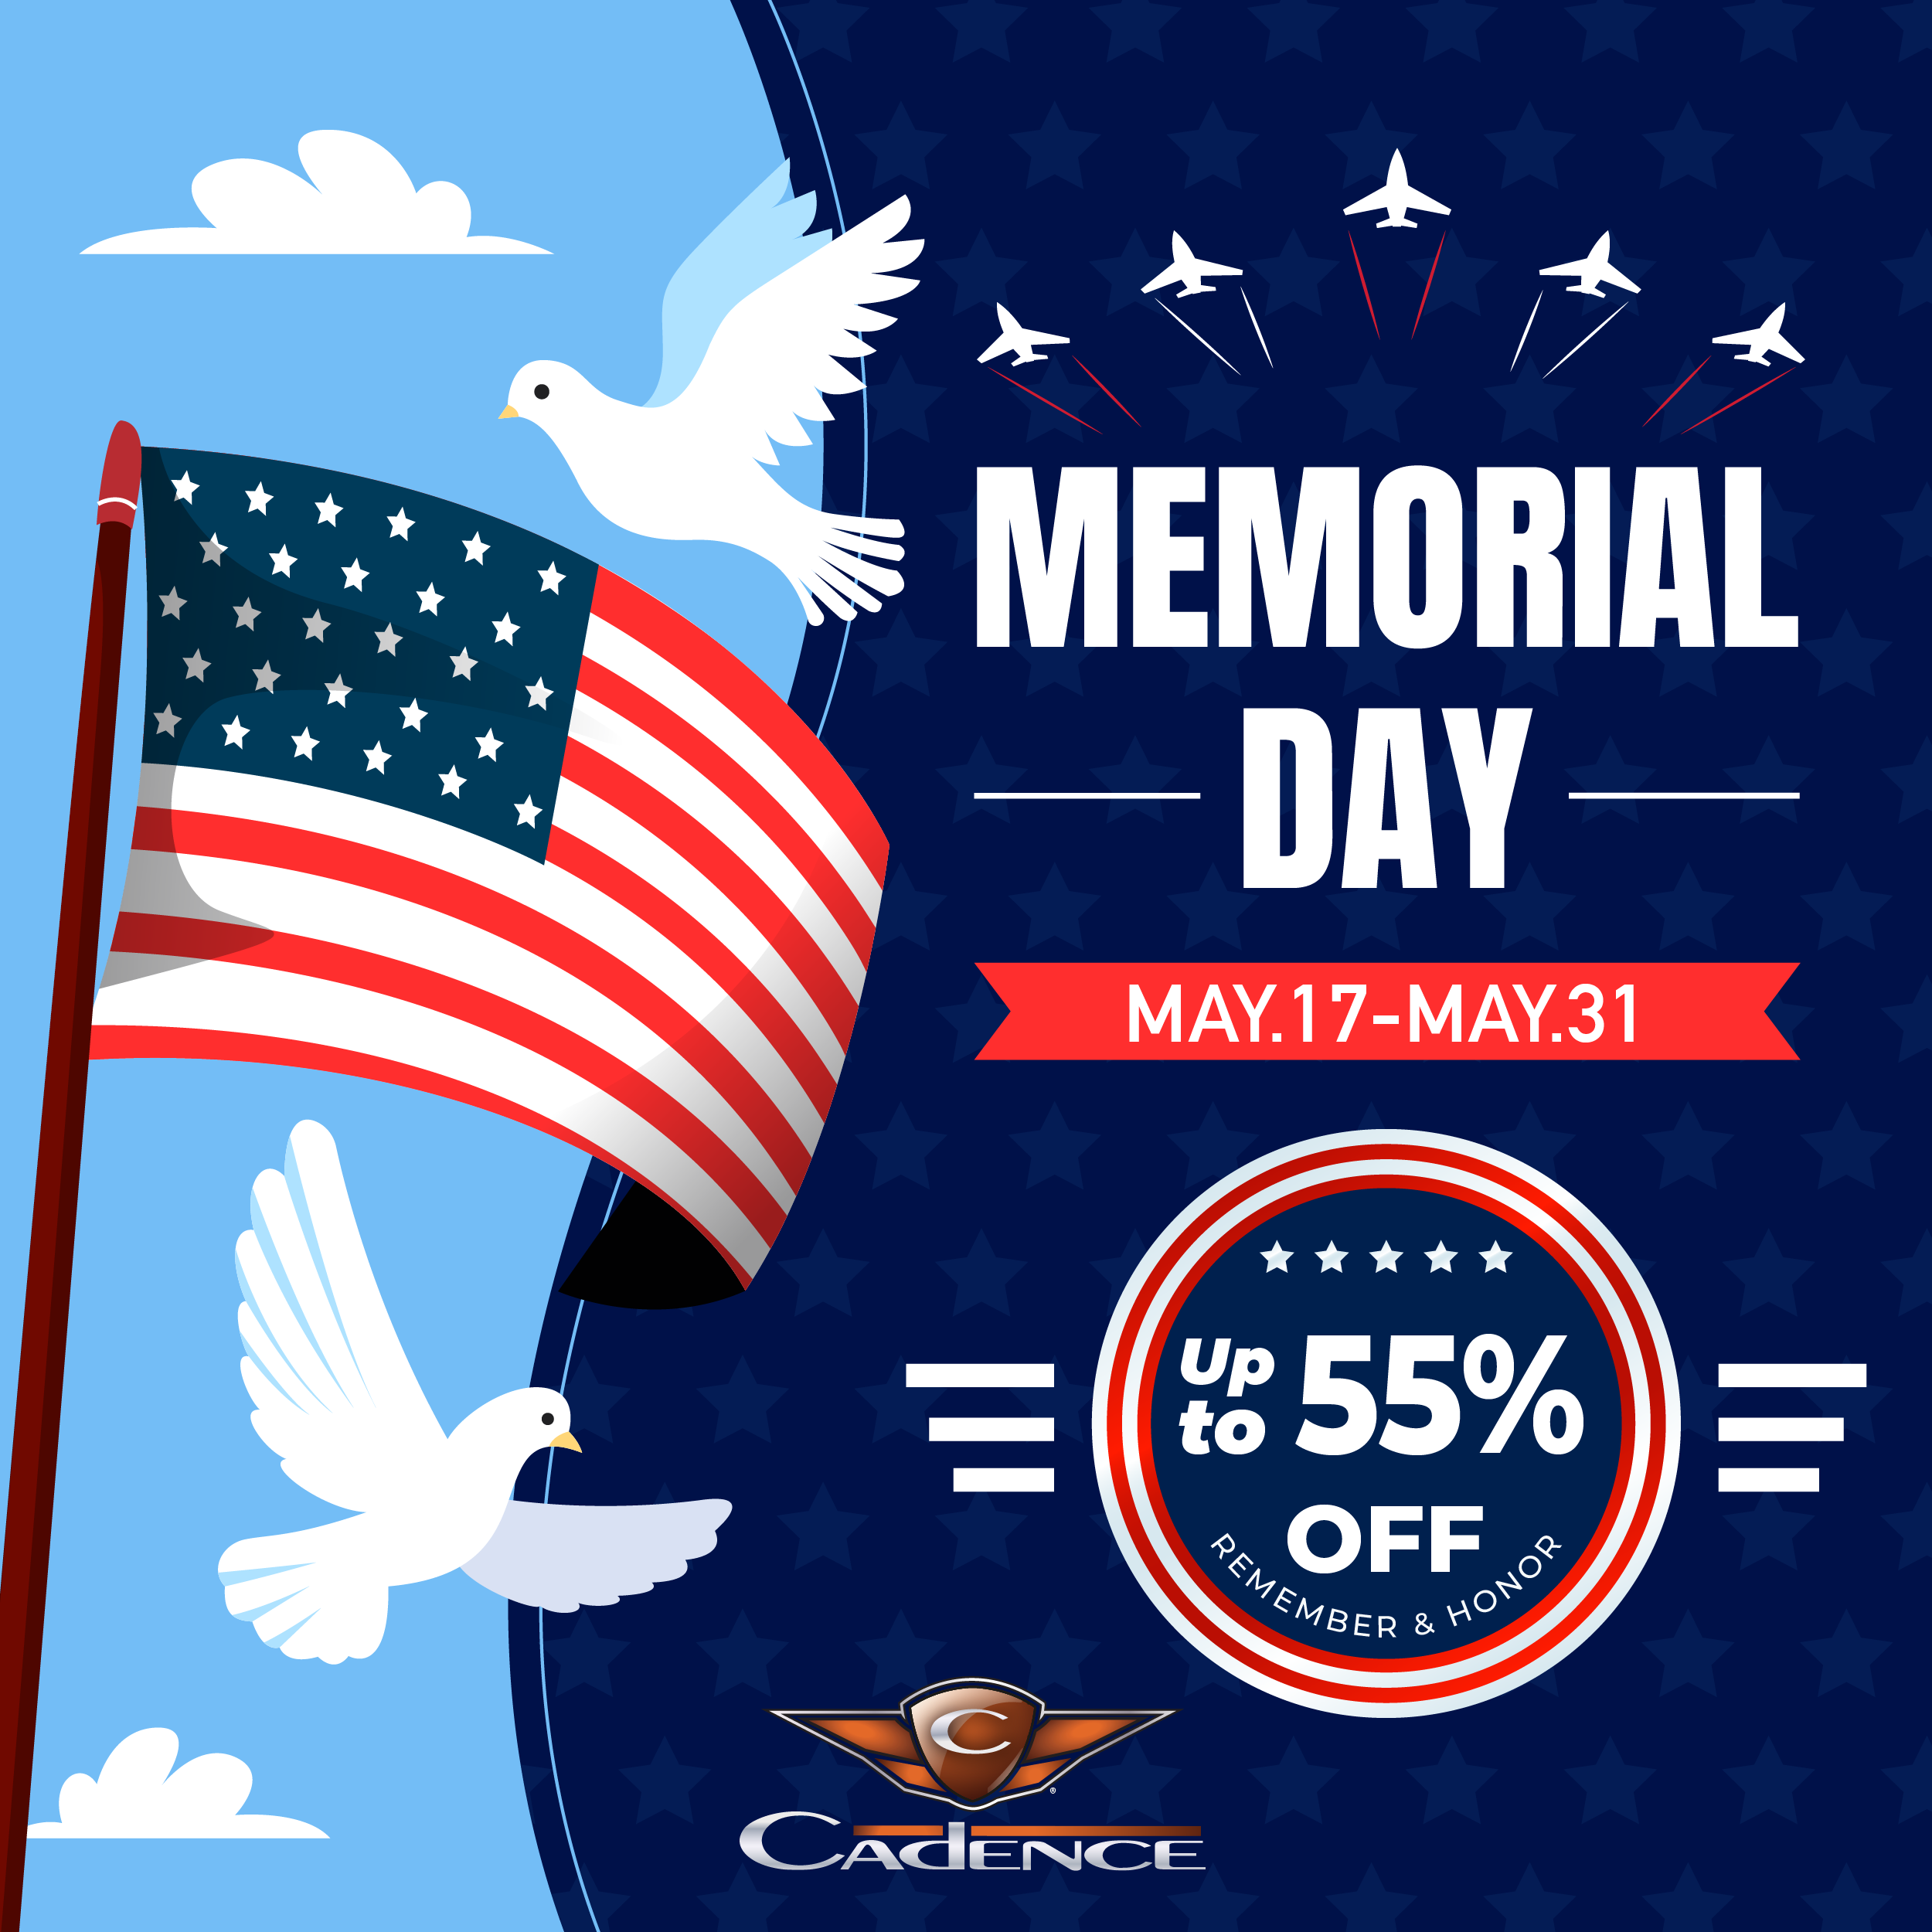 Up to 55% Off on Memorial Day!